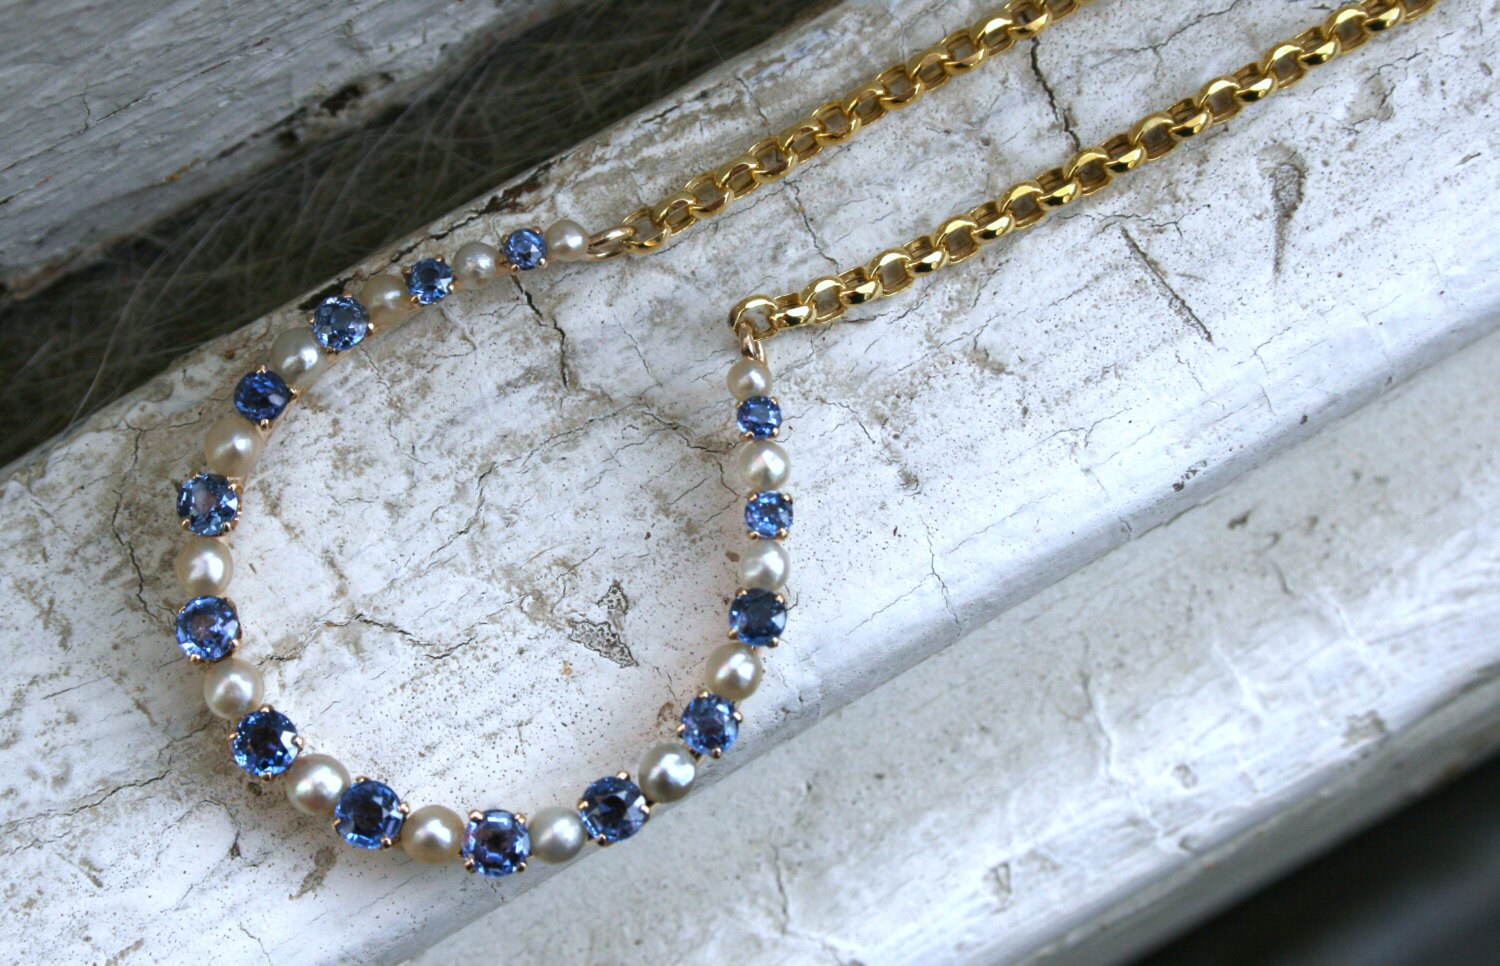 Vintage 14K Yellow Gold Pearl and Sapphire Horseshoe Necklace.